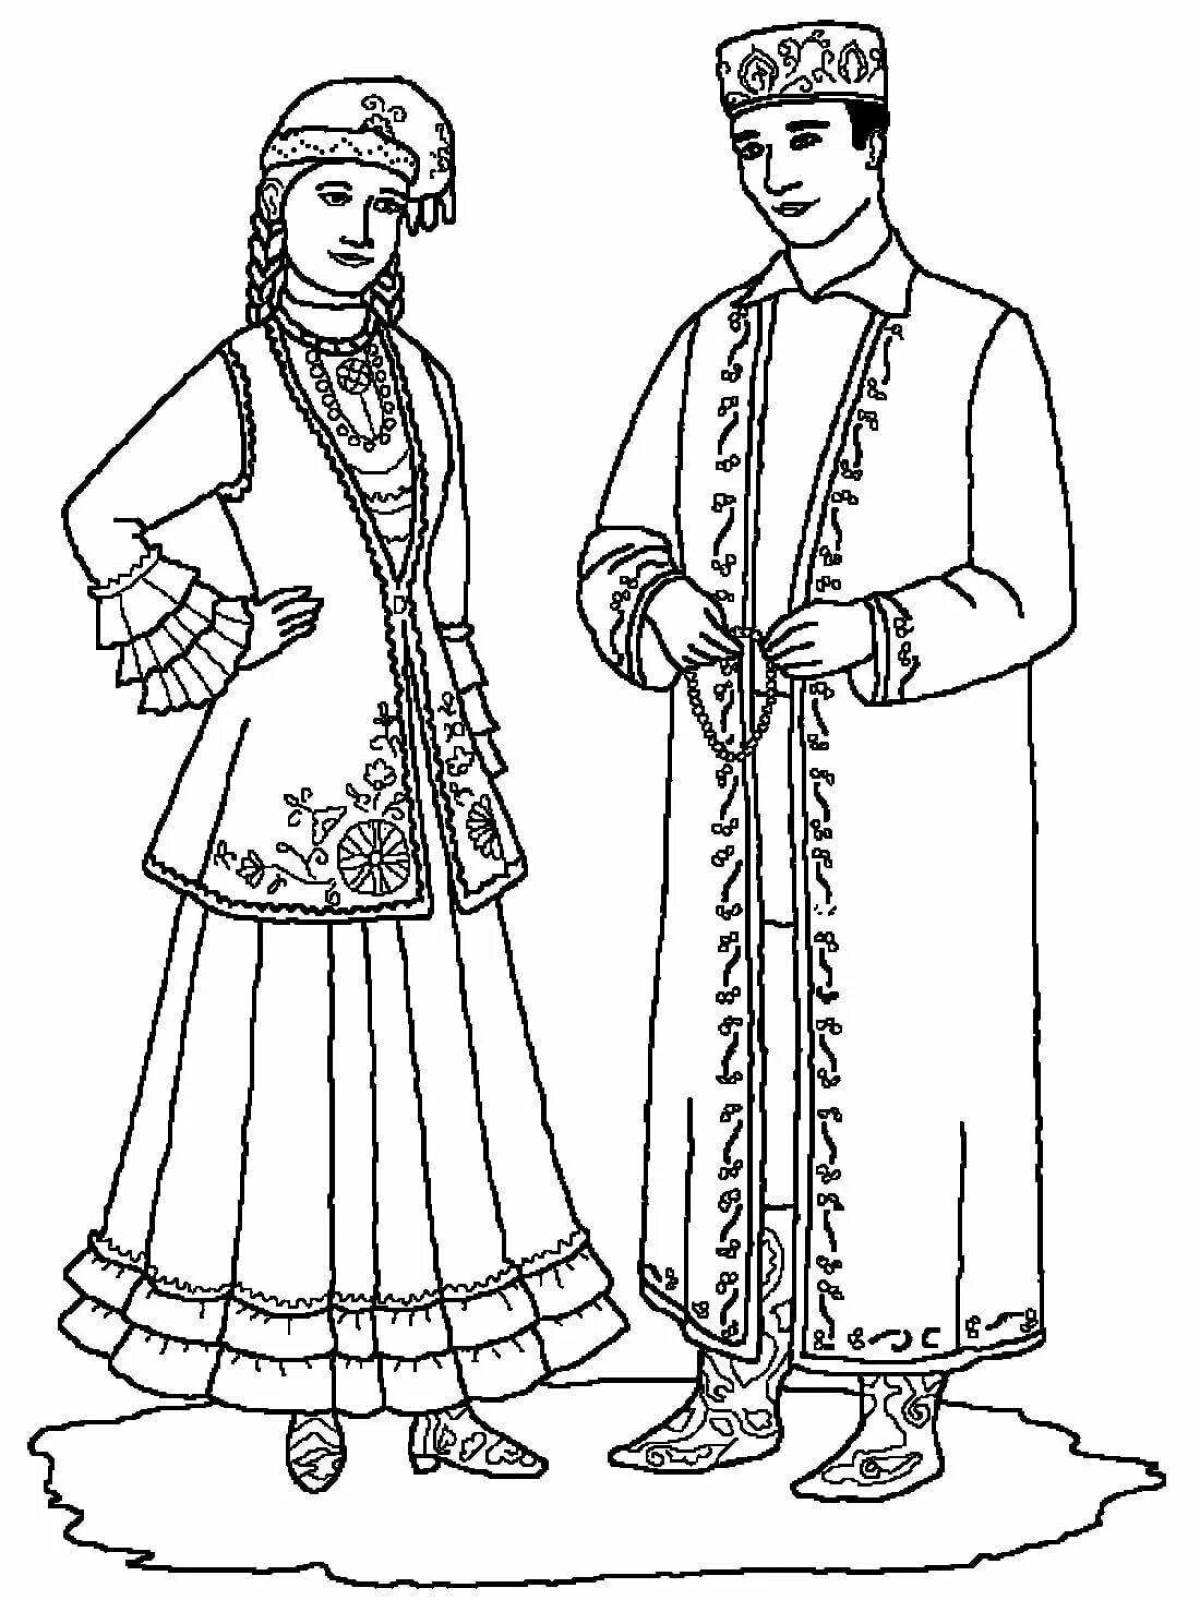 Coloring page charming folk costume for children